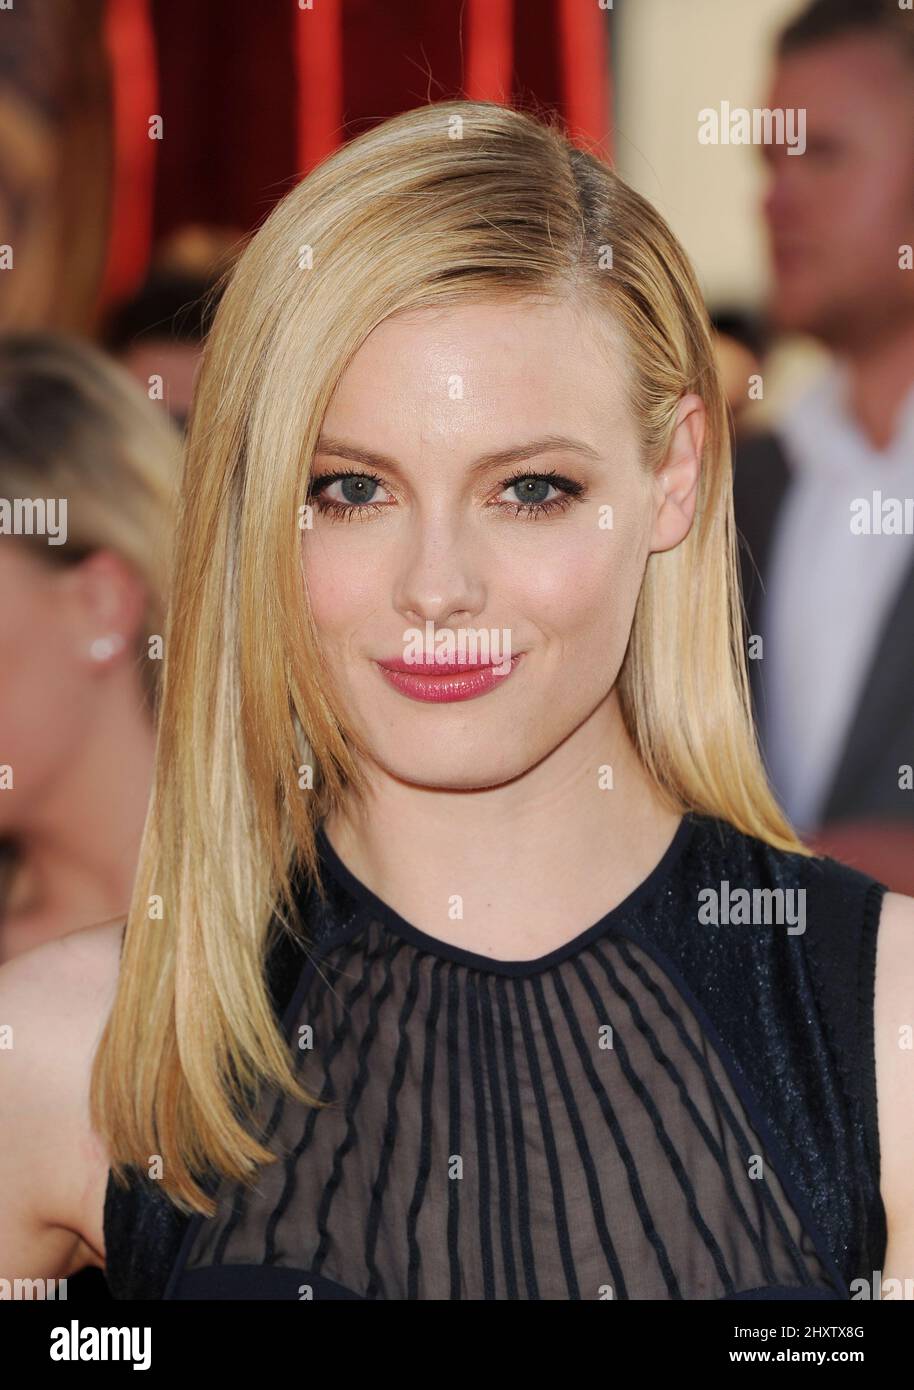 Gillian Jacobs arriving at the Los Angeles Premiere of 'Thor' at the El Capitan Theater on May 2, 2011 in Hollywood, USA. Stock Photo